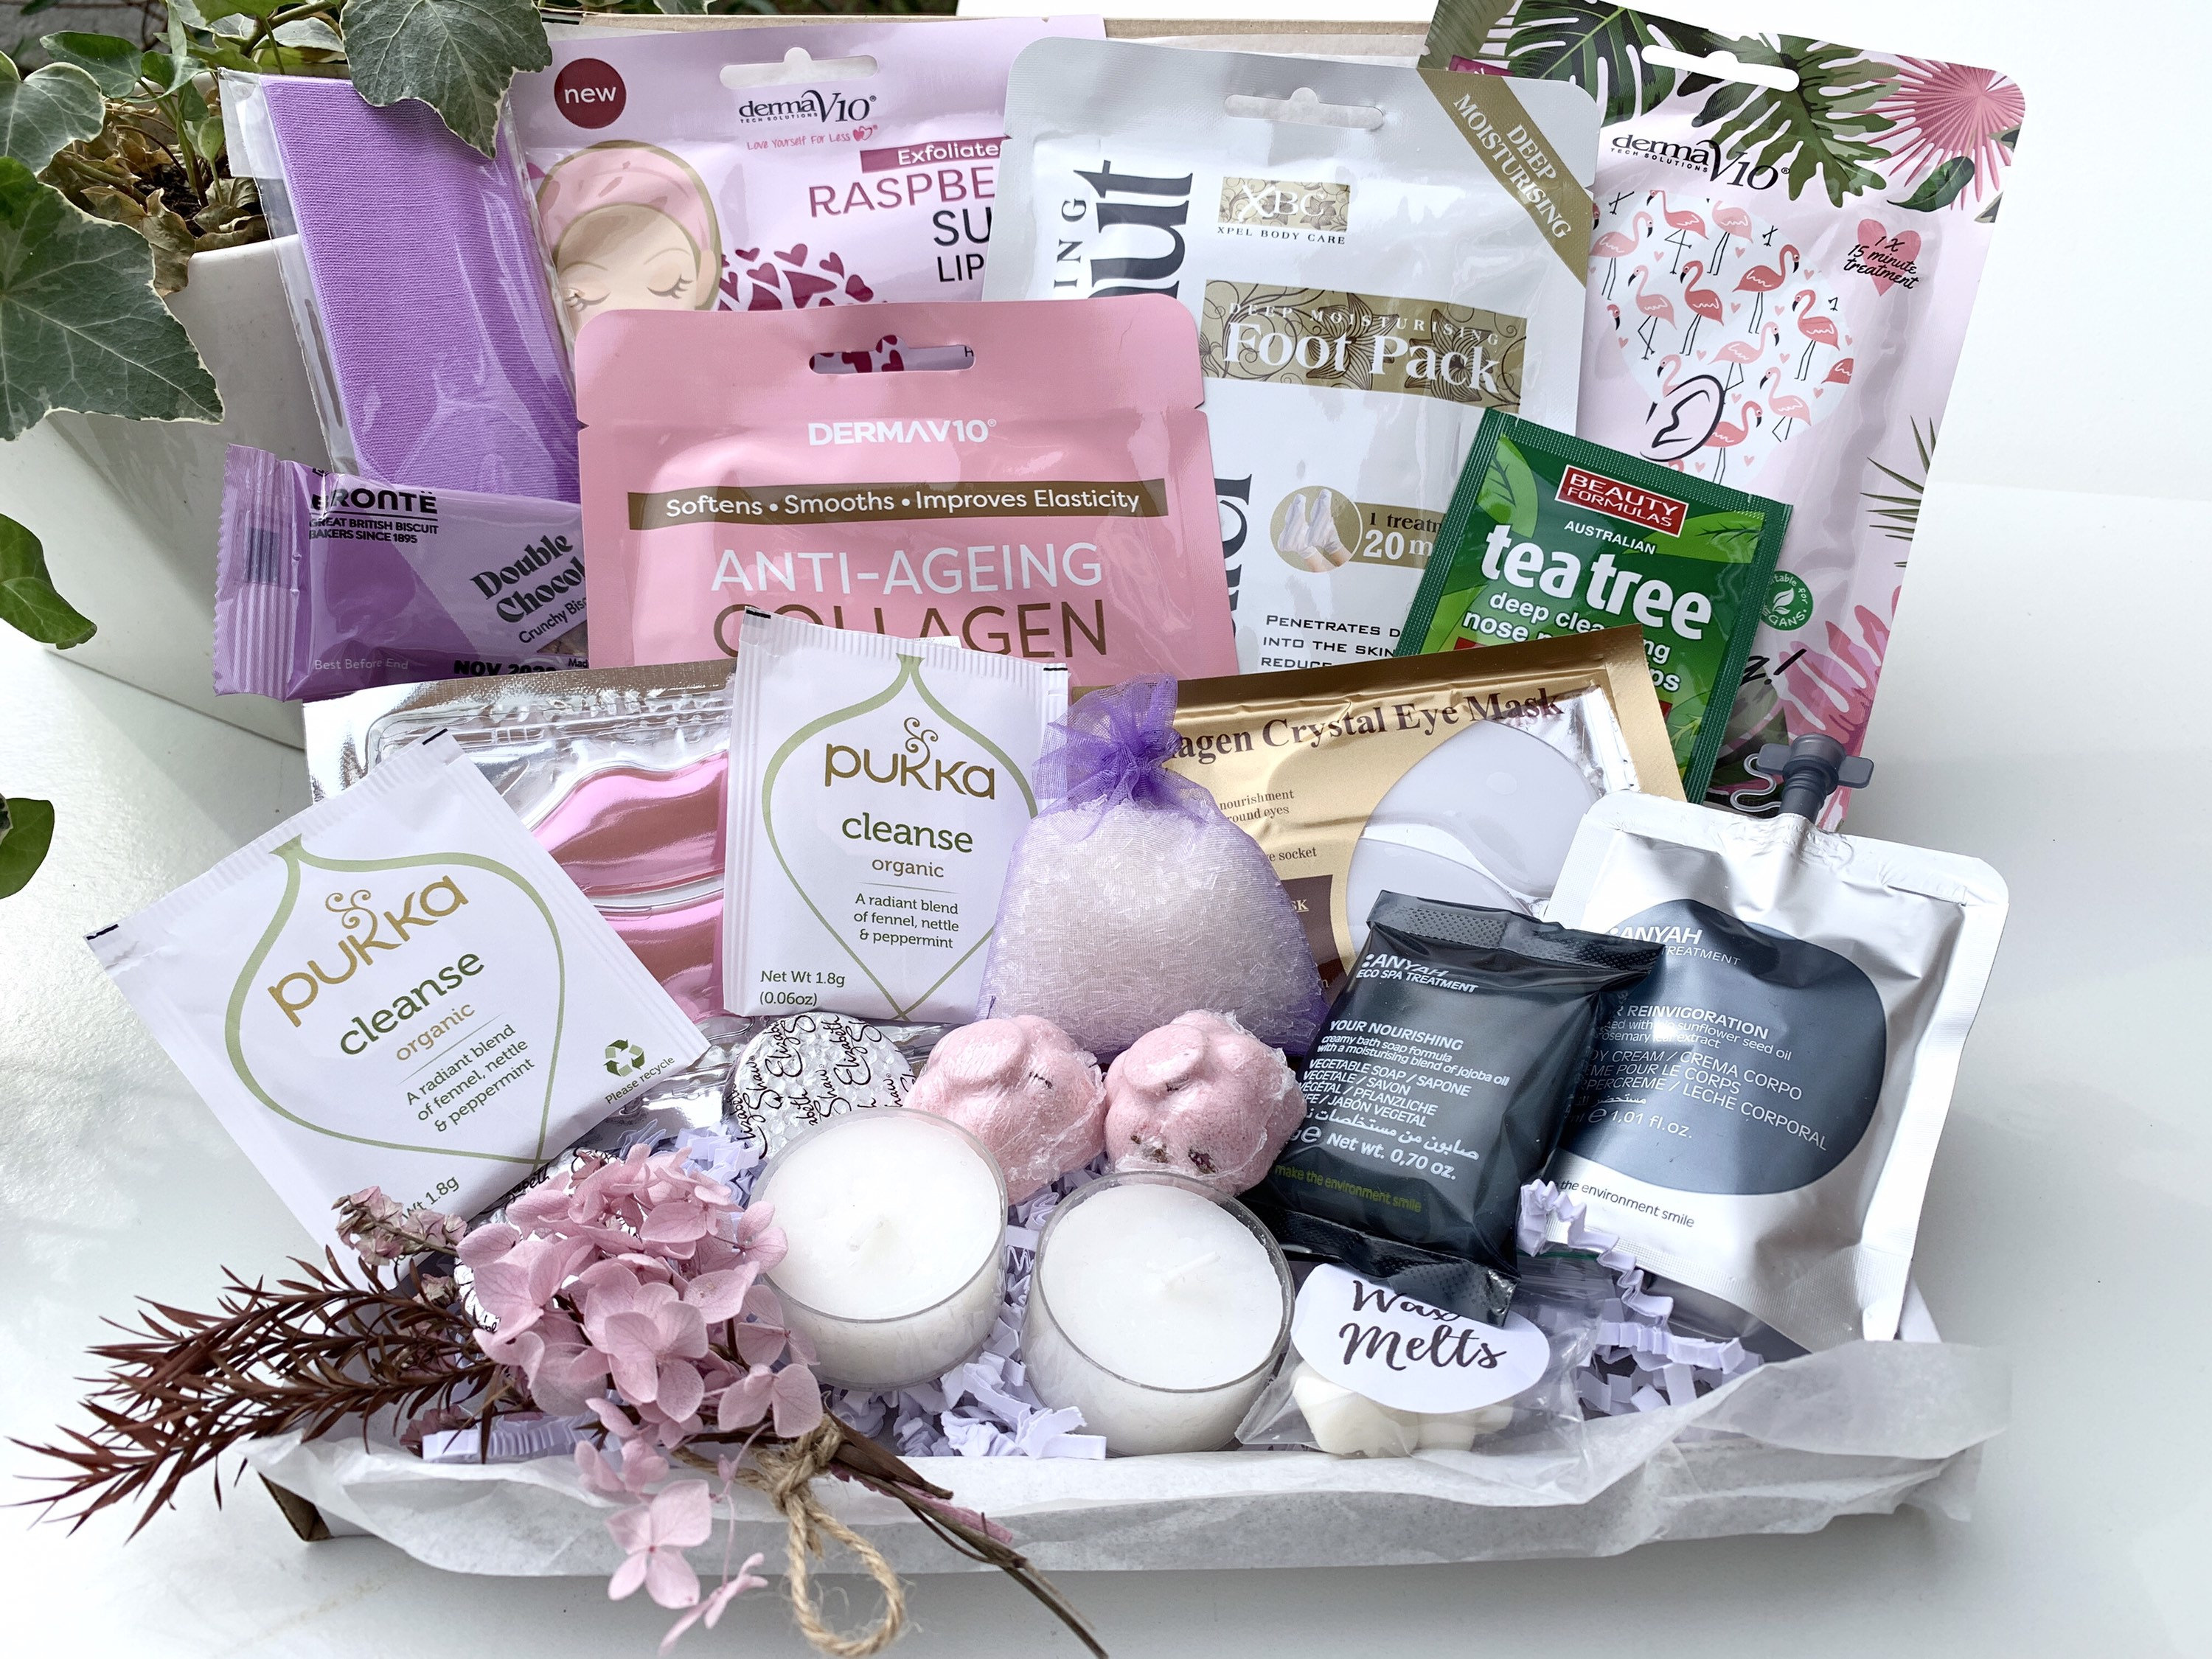 New Mom Gift Basket - Home Spa Gift to Pamper